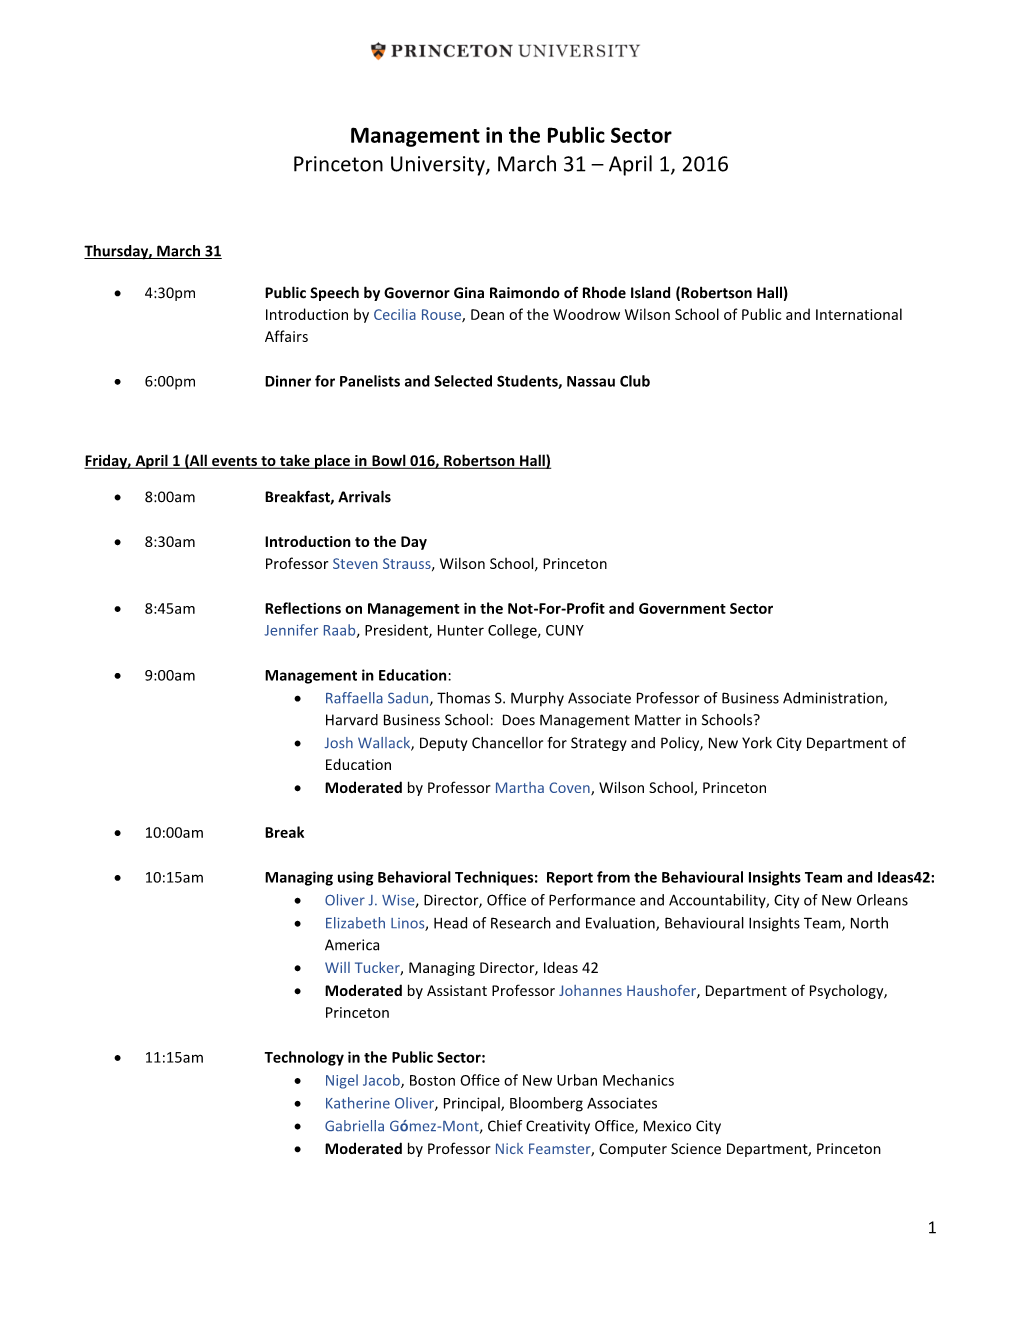 Management in the Public Sector Princeton University, March 31 – April 1, 2016